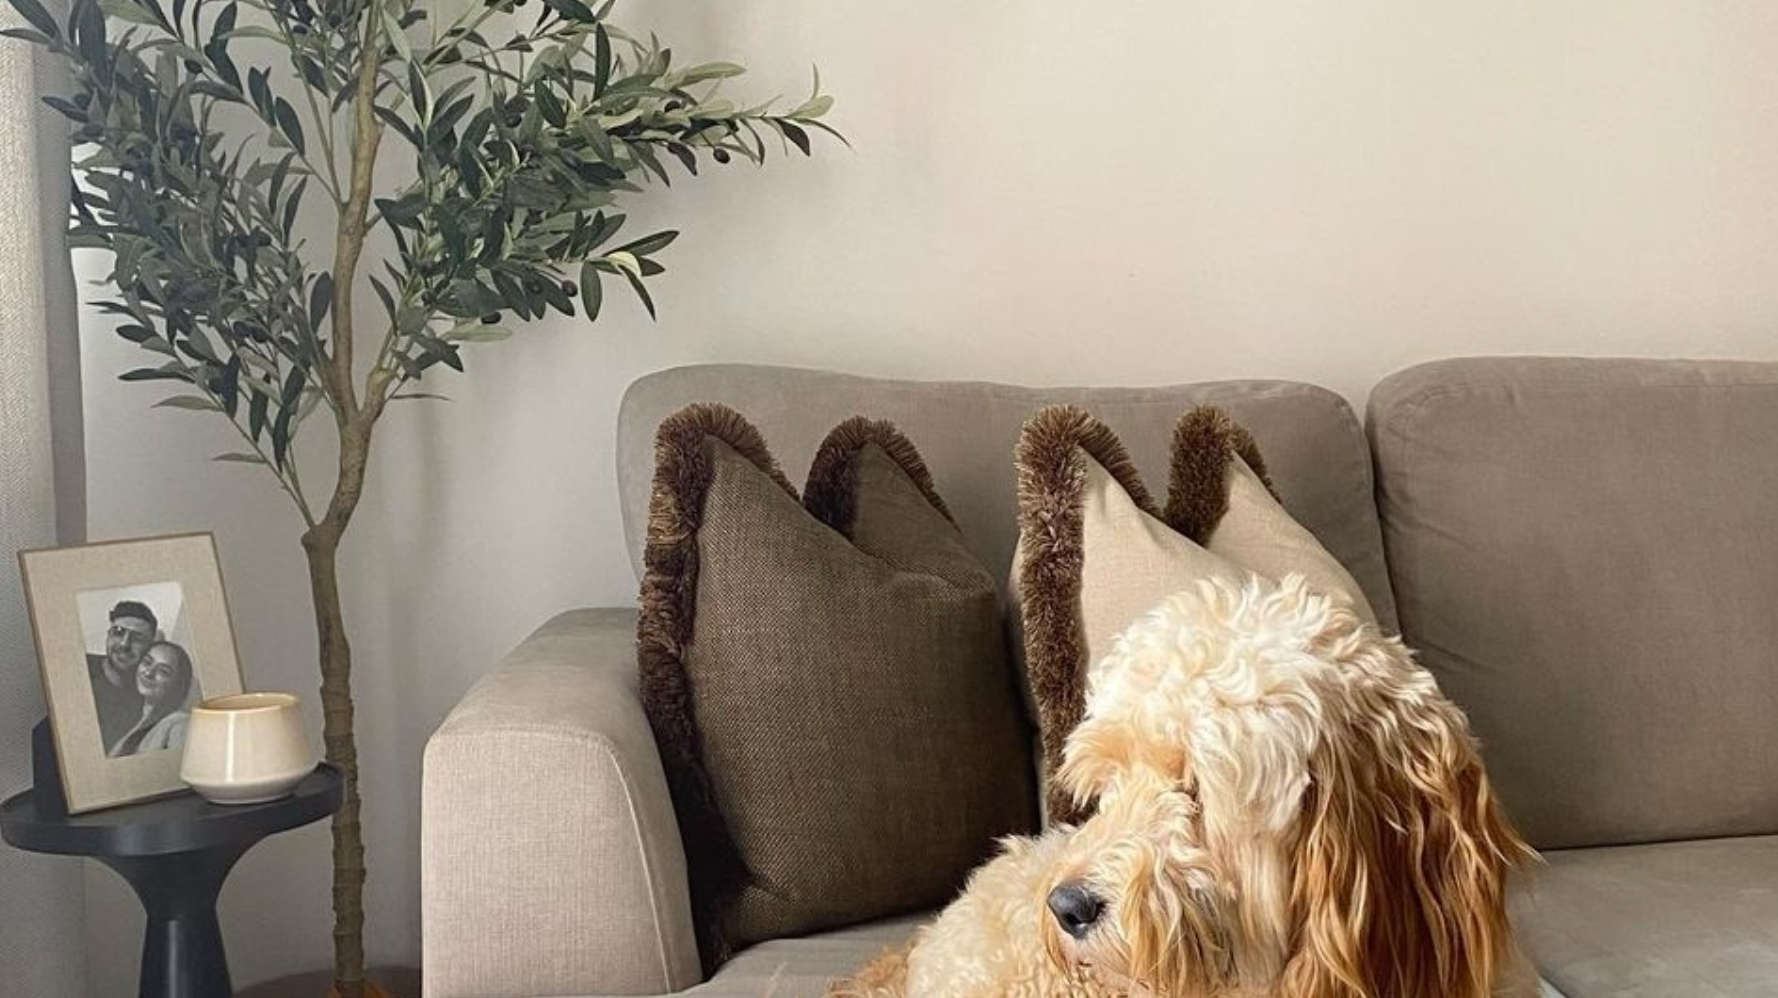 Embrace Greenery Safely: Why Premium Faux Plants from Artiplanto.com Are a Pet-Friendly Choice